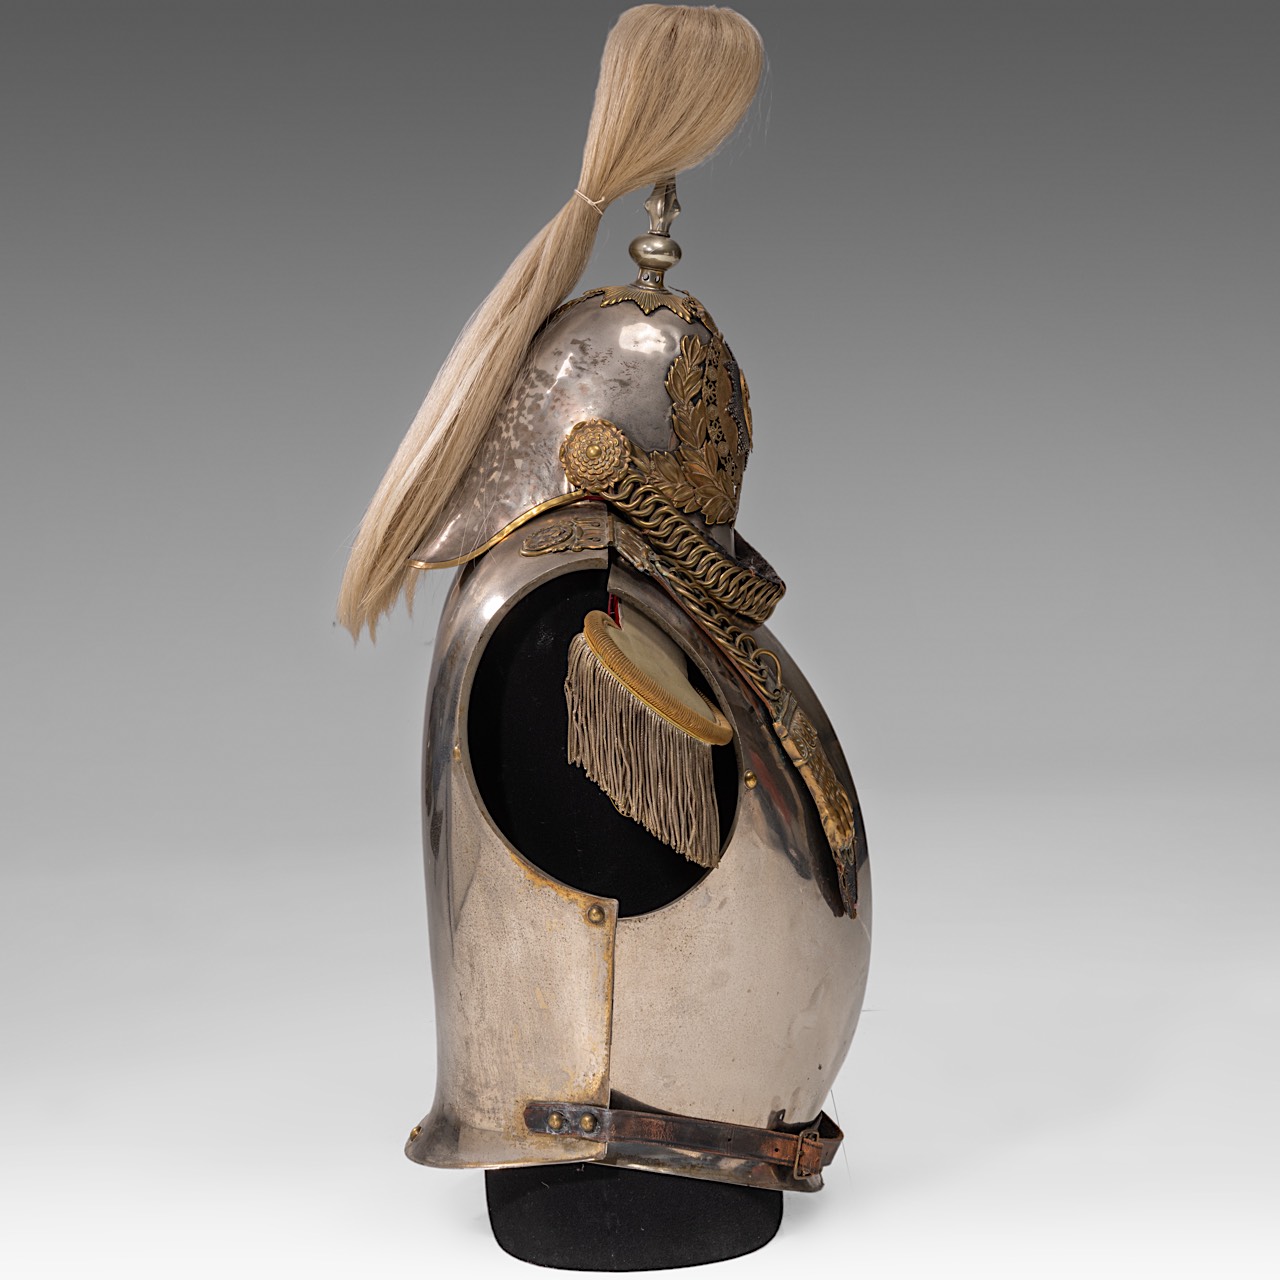 Cuirass and helmet of the Royal Horse Guards, metal and brass, Queen Victoria (1837-1901) - Image 6 of 8